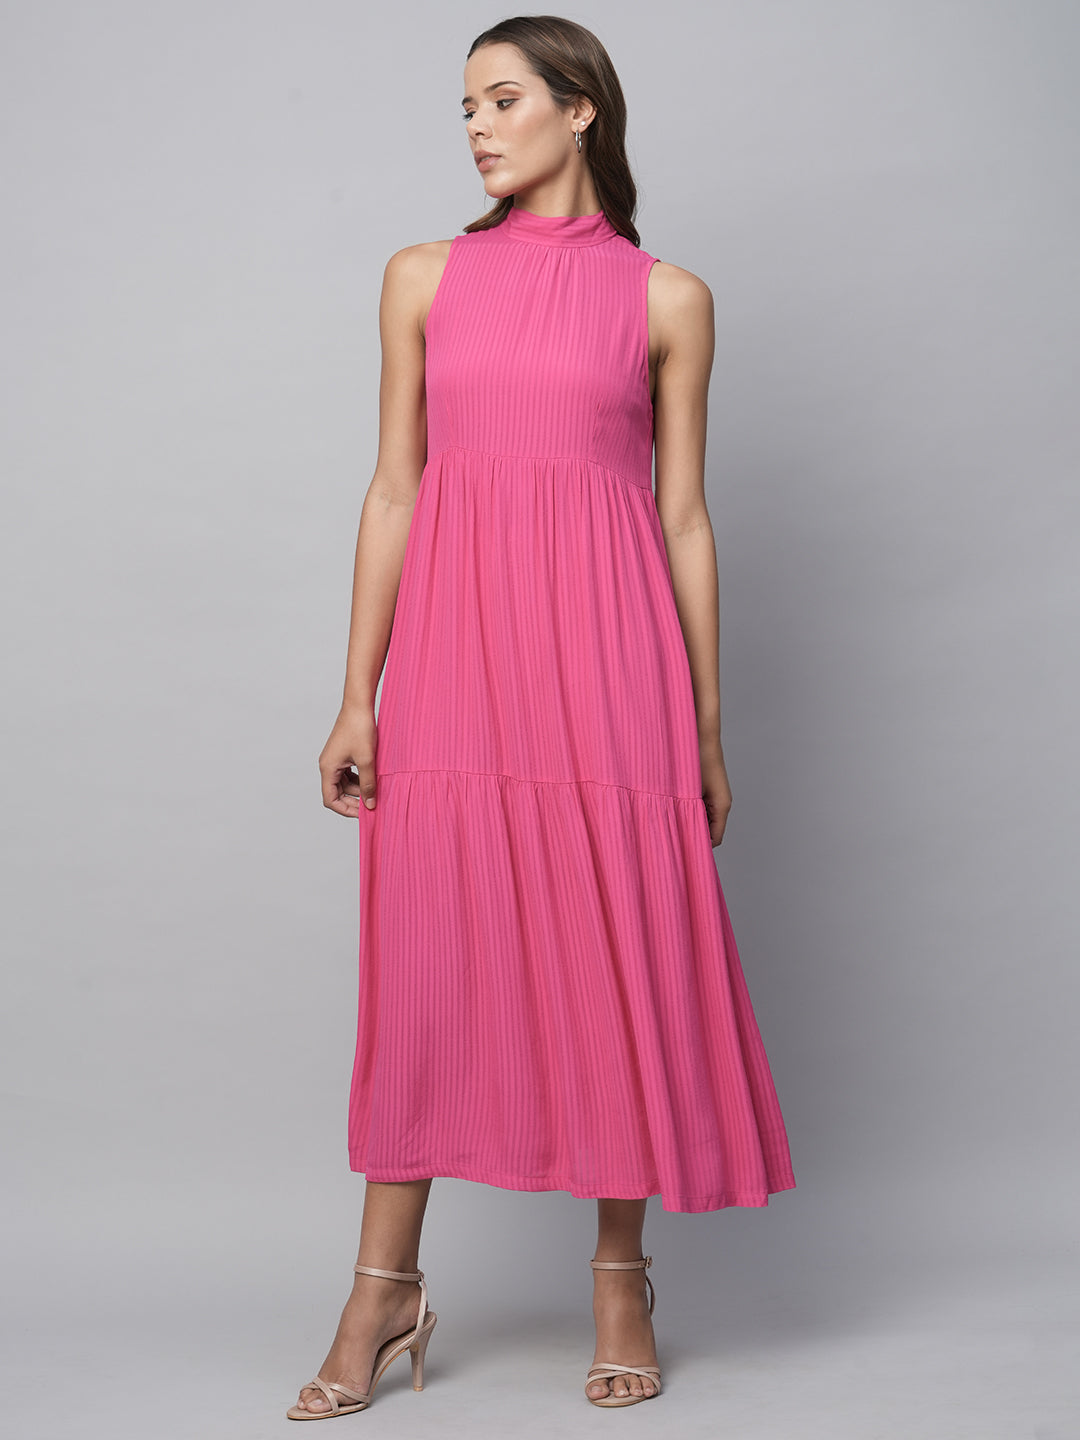 Viscose Crepe Dobby Incut Tie Neck, Tiered Dress